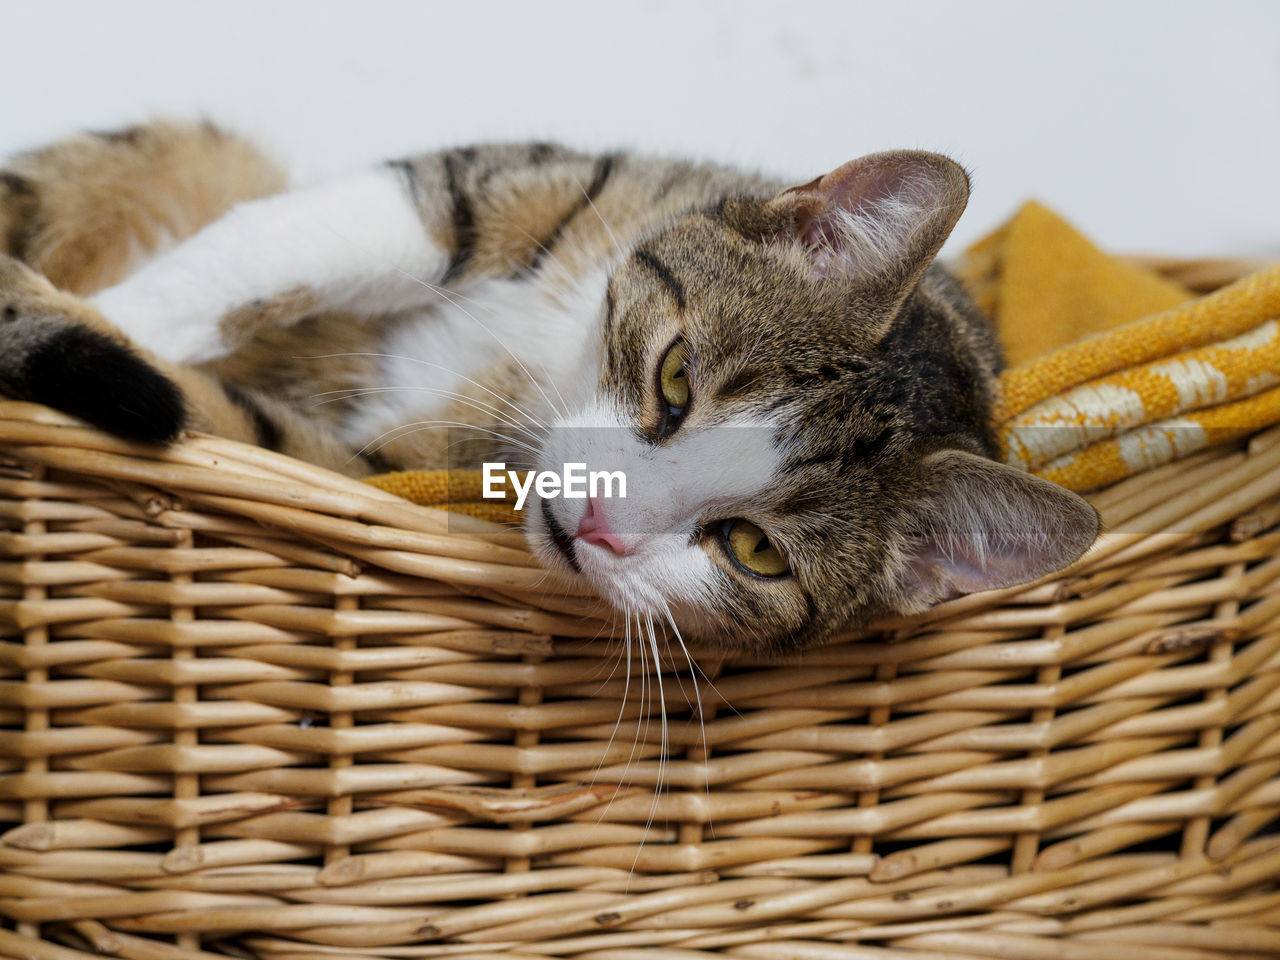 Close-up of a cat resting in basket